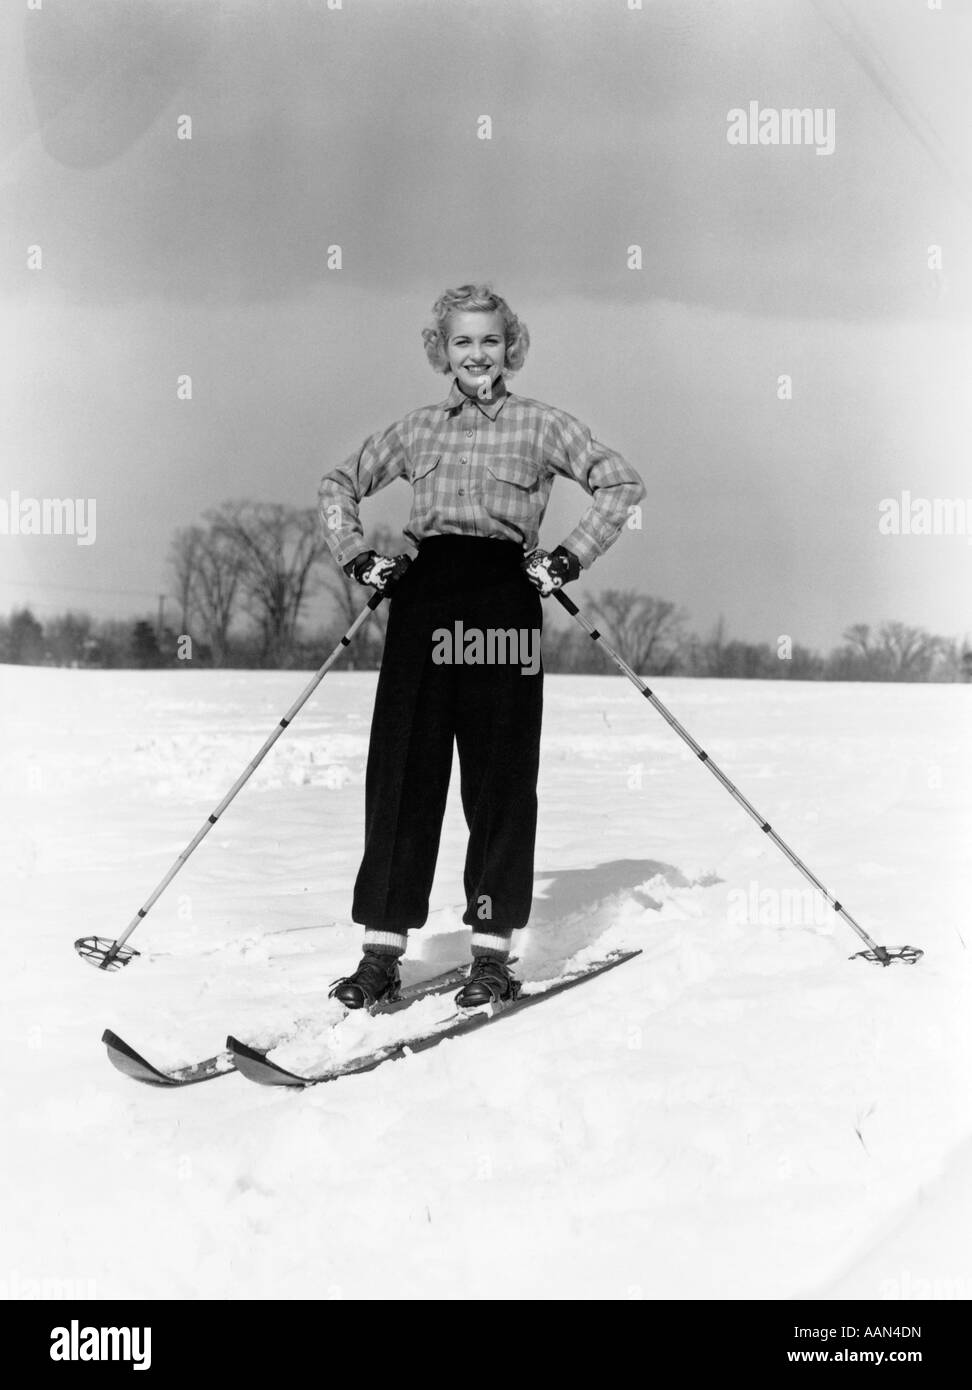 1940s SMILING BLOND WOMAN ON SKIS BOTH HANDS ON HIPS HOLDING SKI POLES IN SNOW FIELD Stock Photo